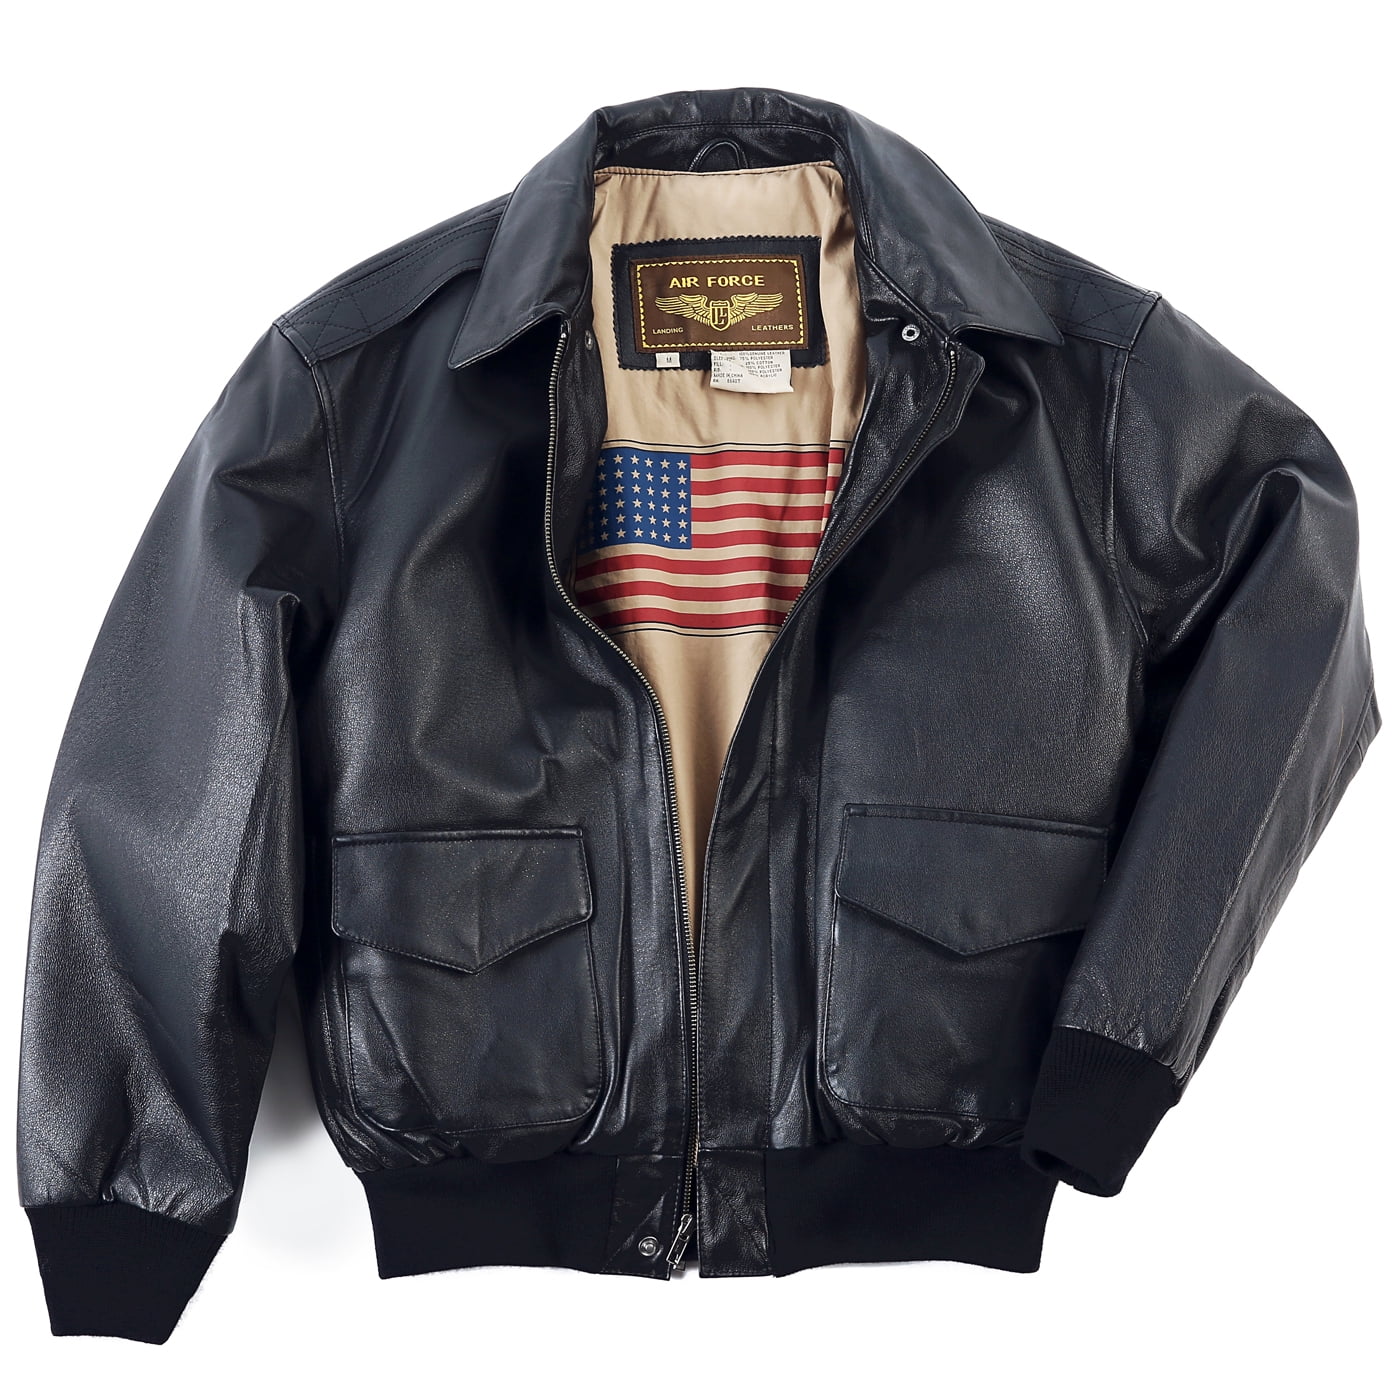 Best leather jackets for men – choosing the right material